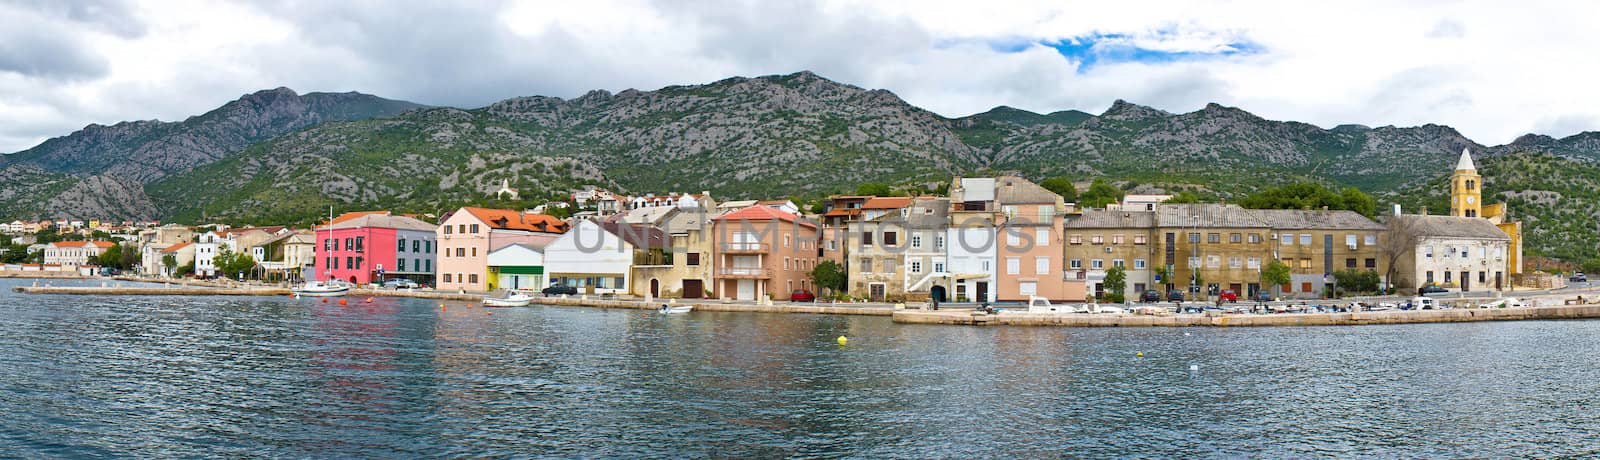 Town of Karlobag in Velebit channel panoramic waterfront view, Croatia